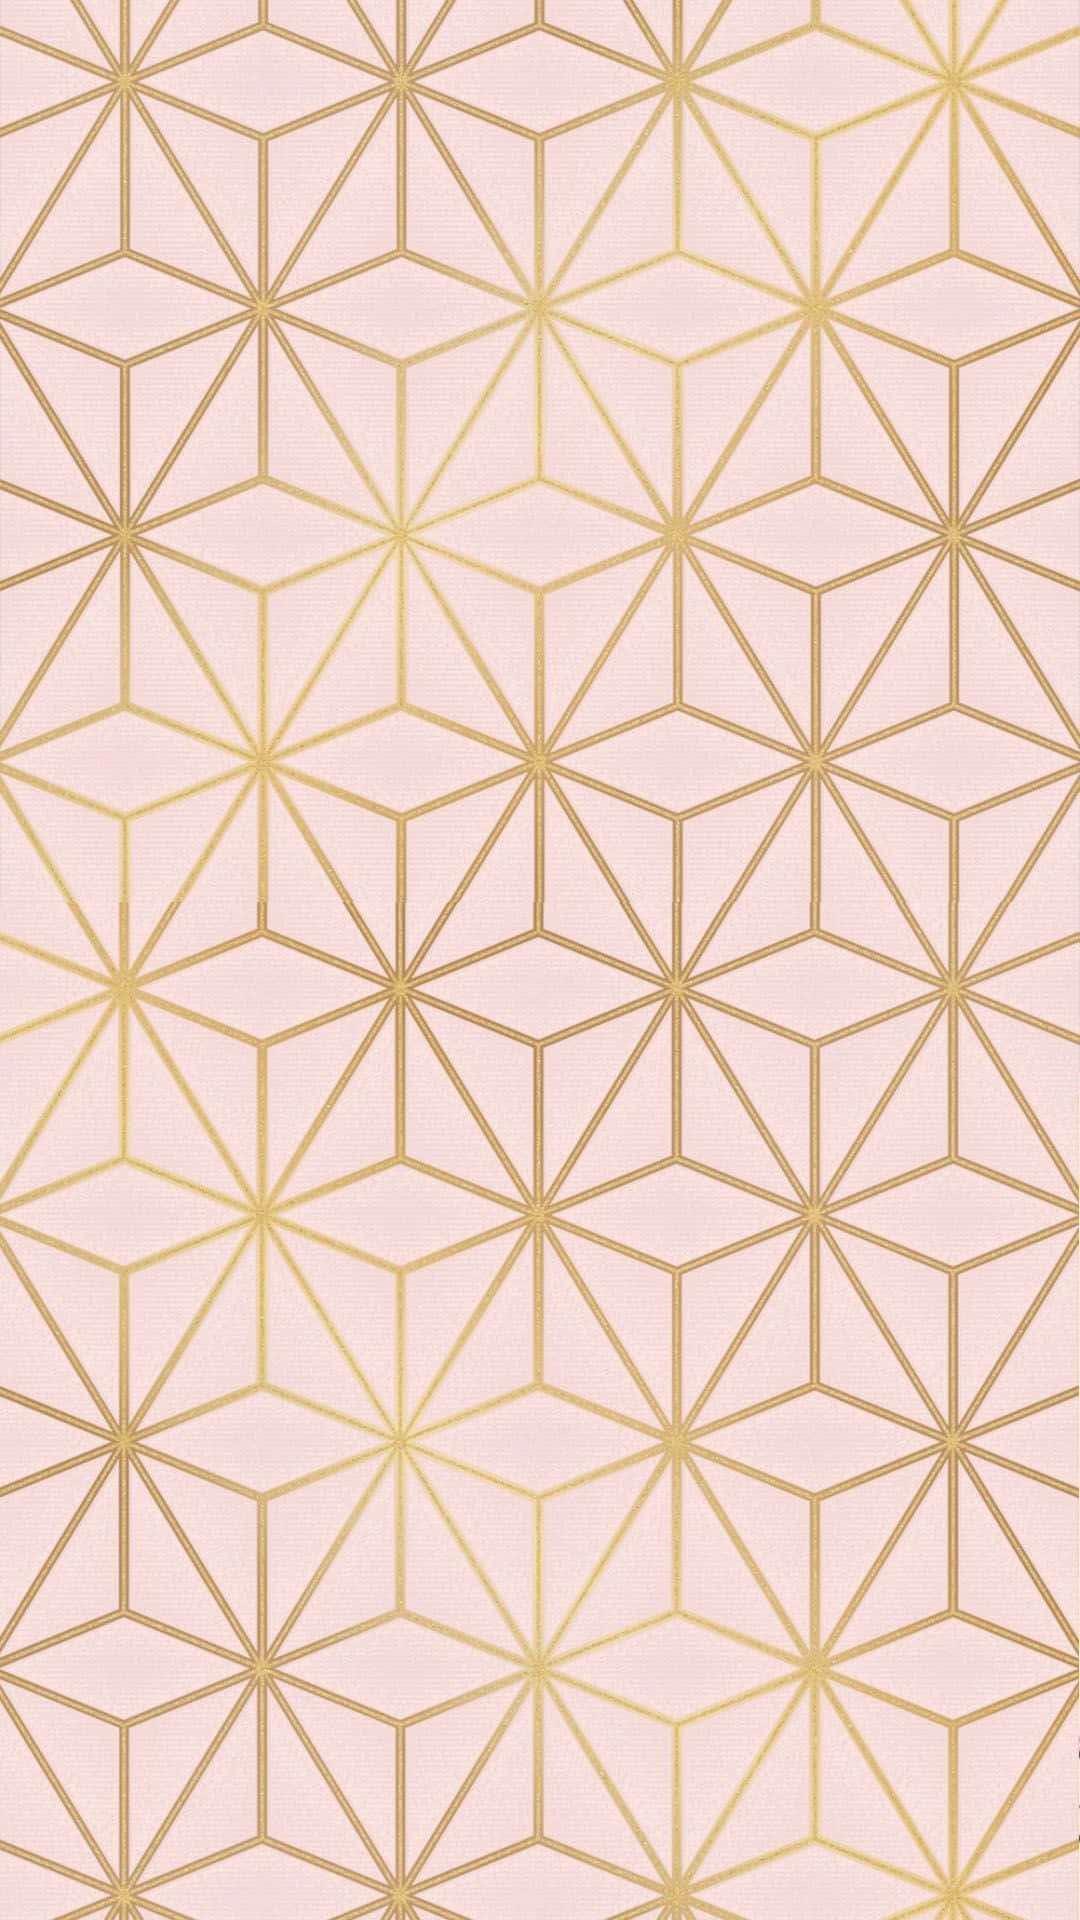 A Pink And Gold Geometric Pattern Wallpaper